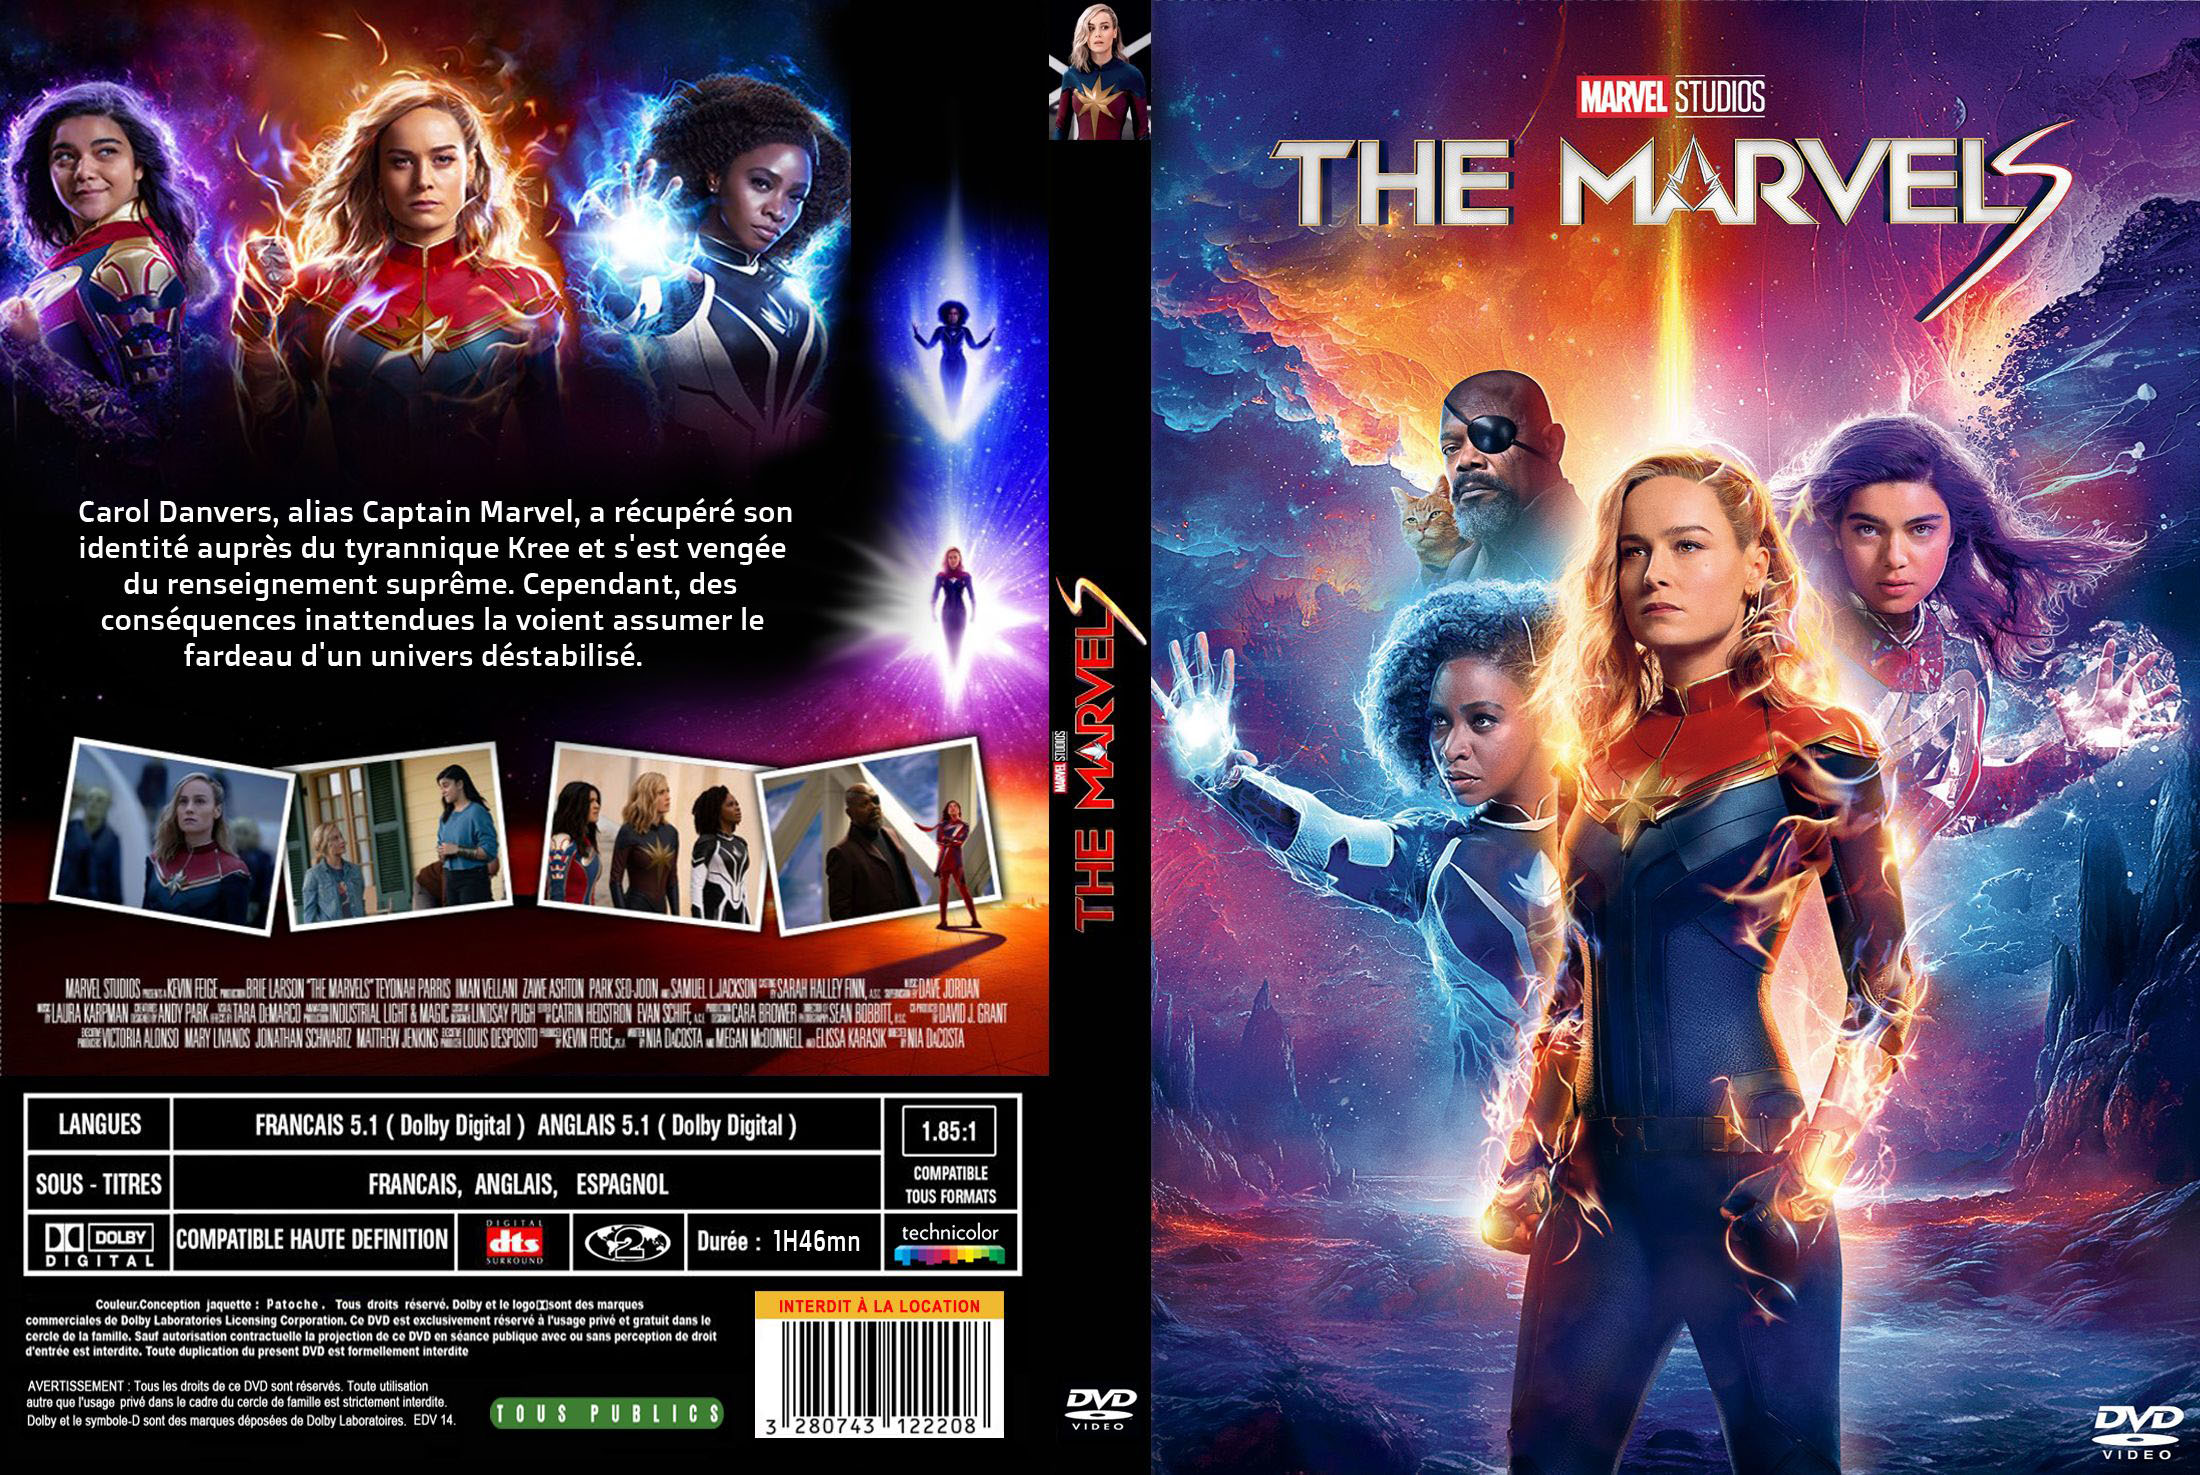 Jaquette DVD The Marvels custom